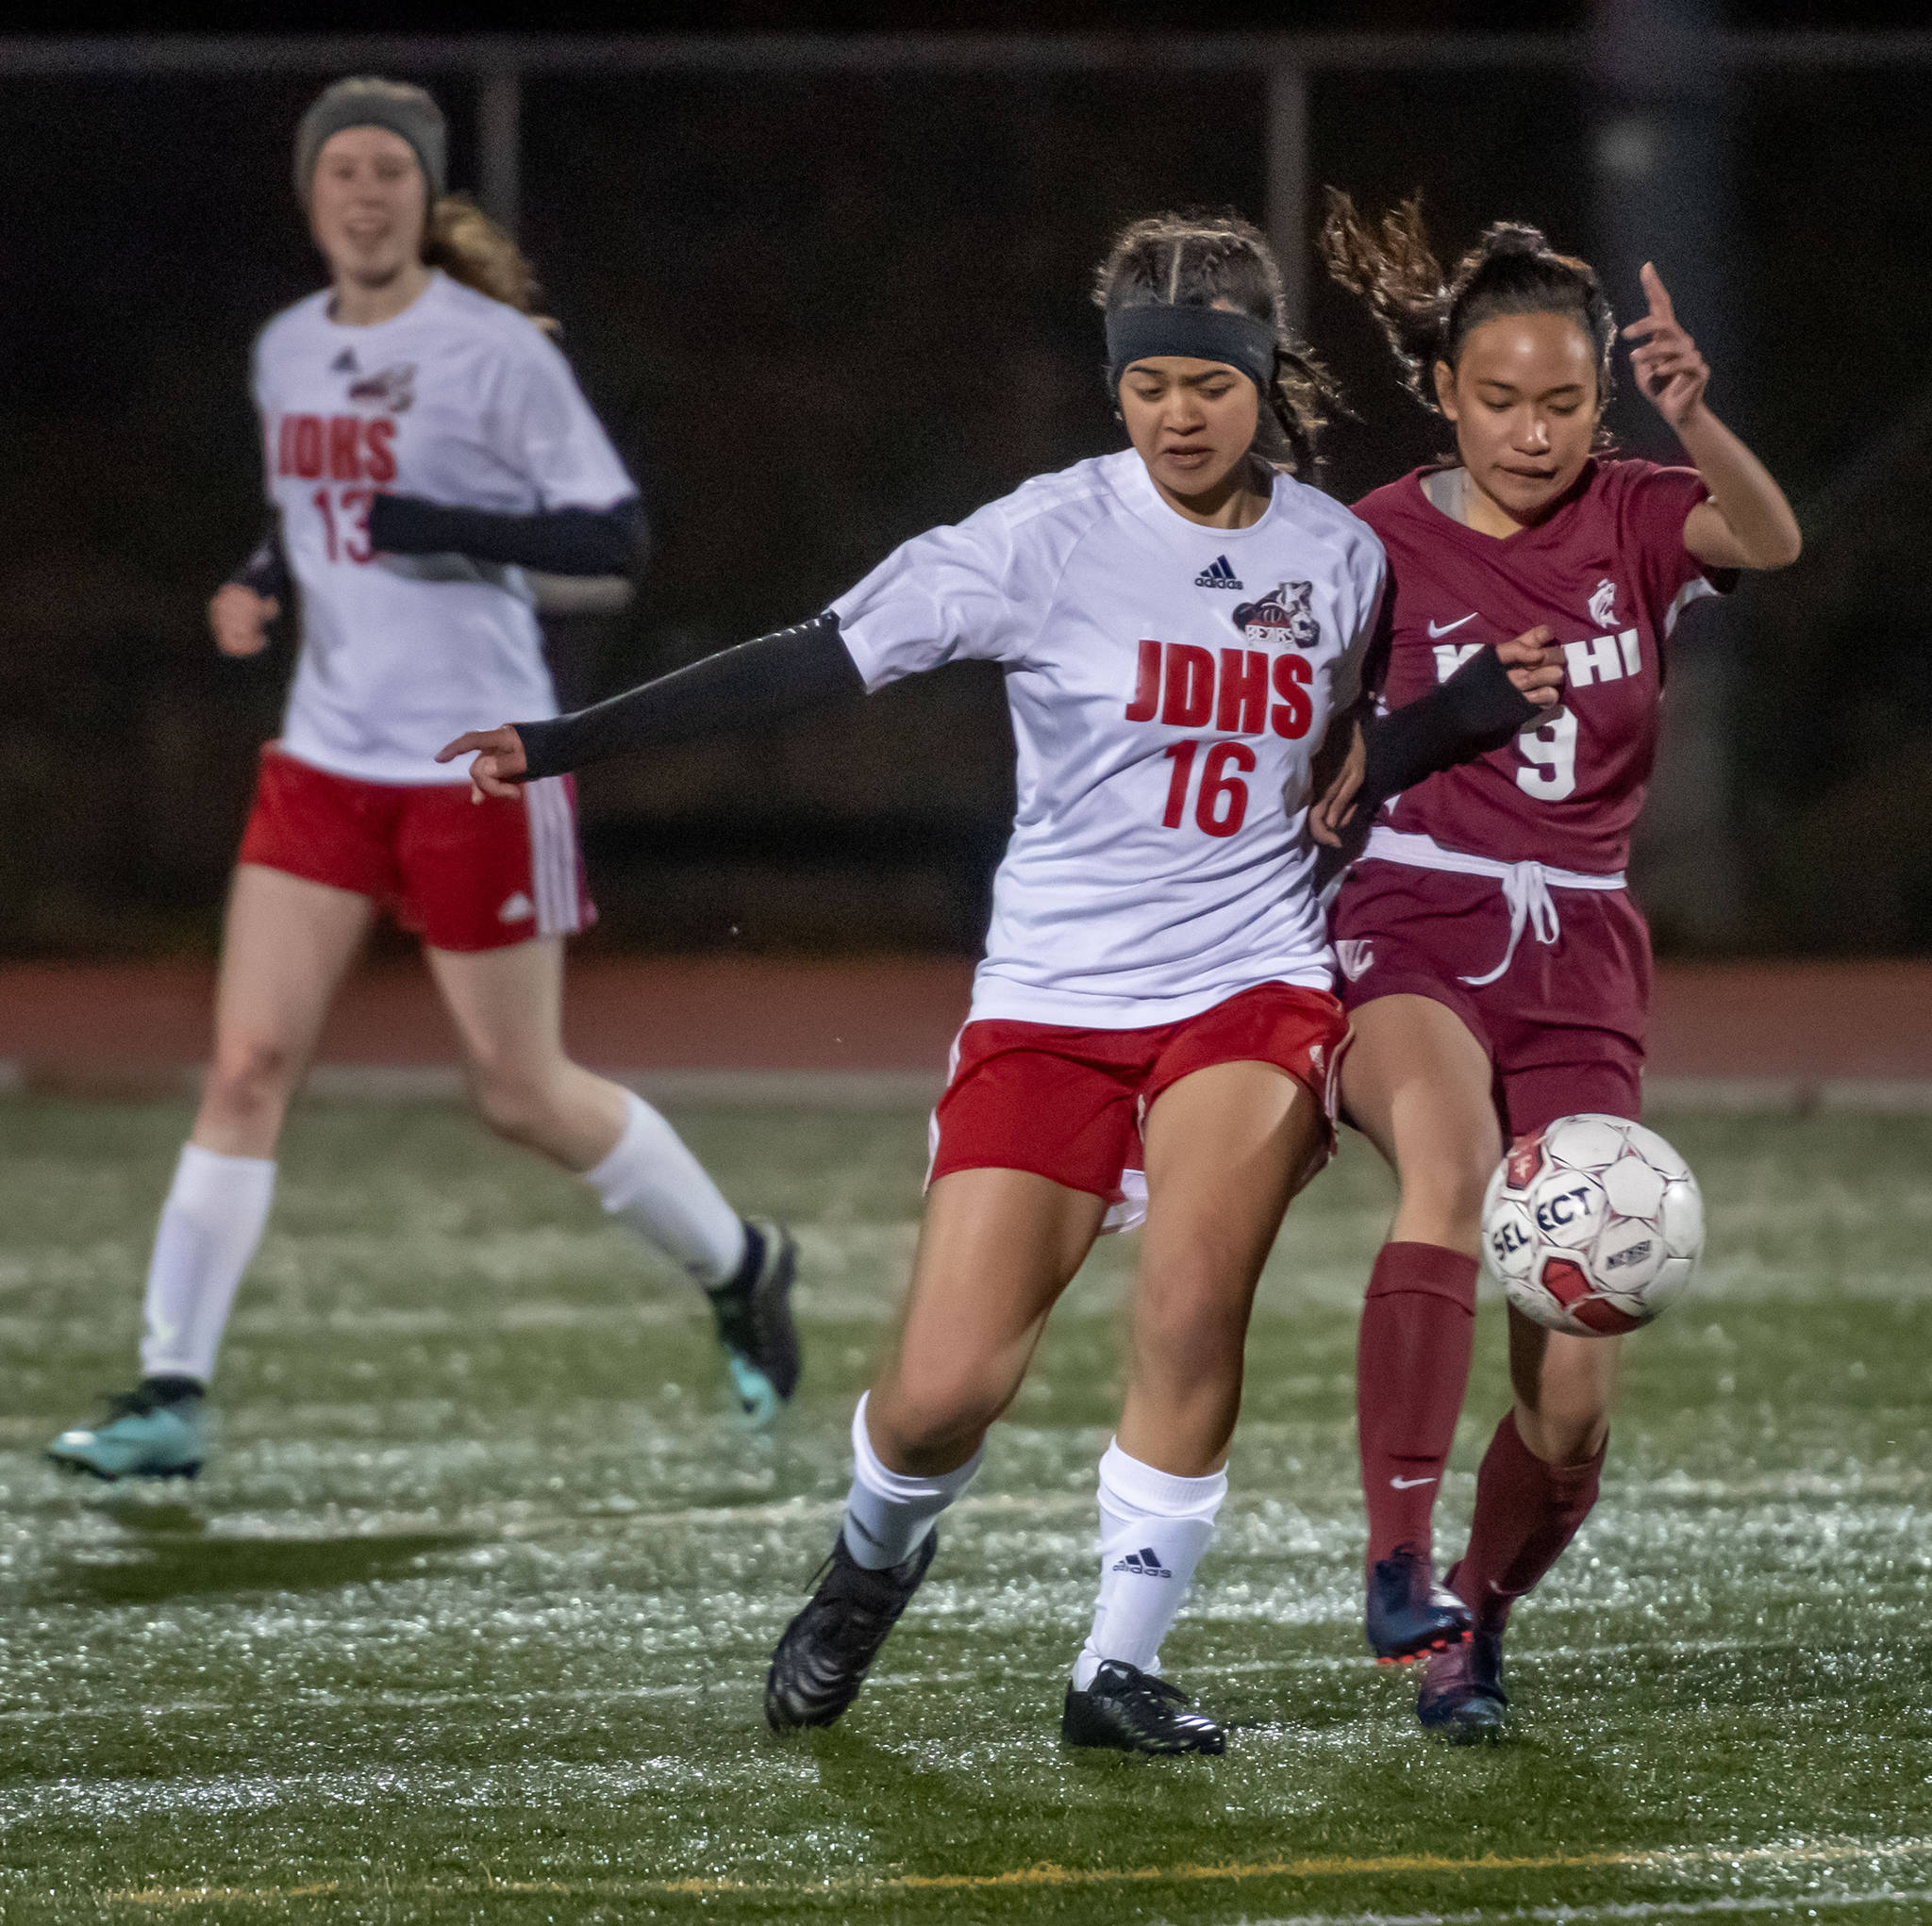 Juneau-Douglas High School’s Sophia Pugh battles for the ball against Ketchikan High School’s Ruvelen Correa during the second half of the Crimson Bears’ 5-0 win at Esther Shea Field in Ketchikan on Friday. (Charley Starr | Ketchikan Daily News)